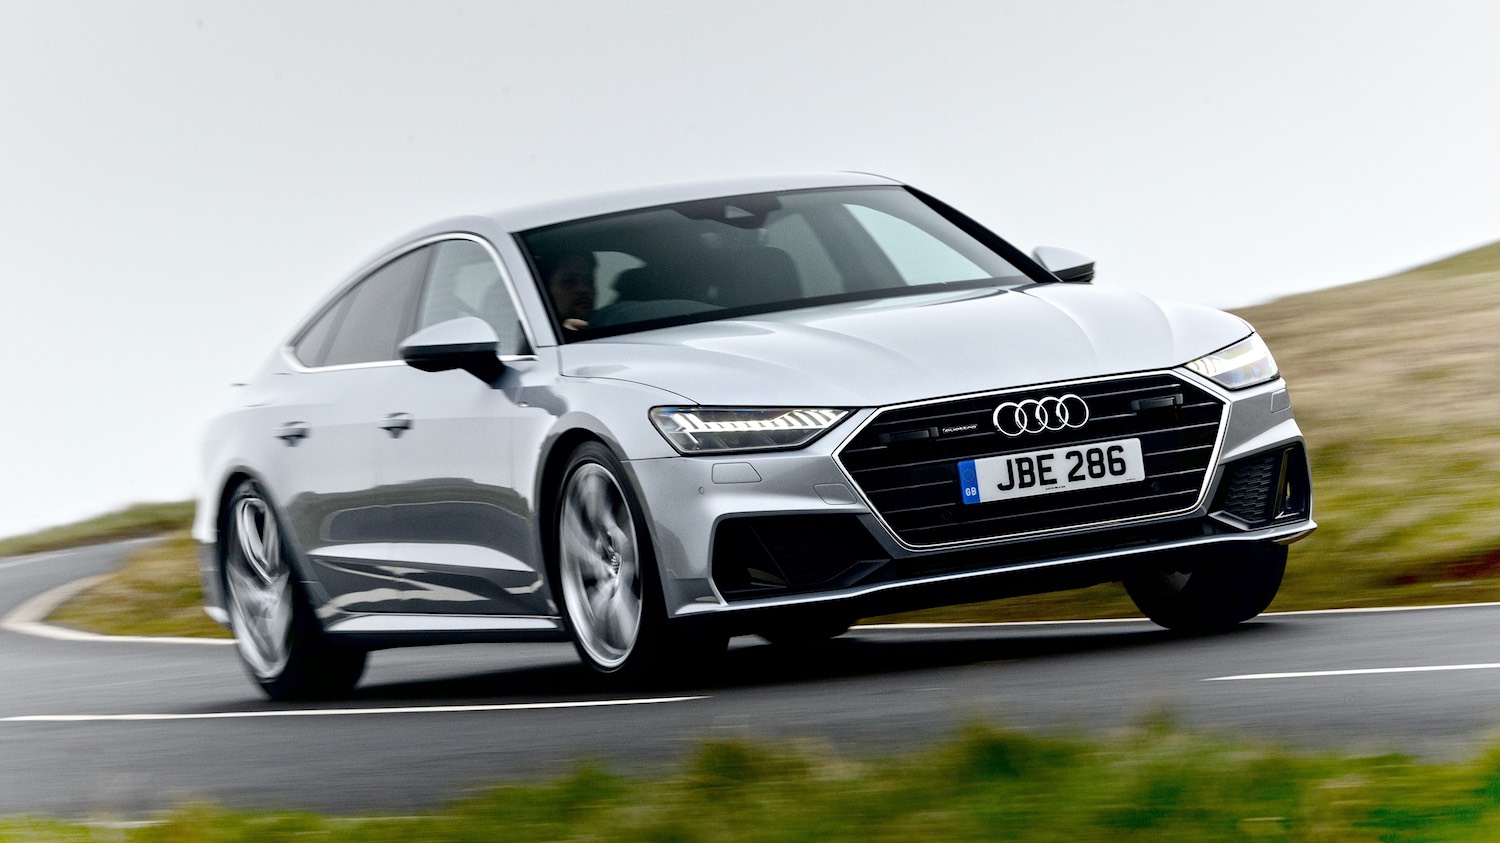 The superb All-New Audi A7 Sportback reviewed by Neil Lyndon